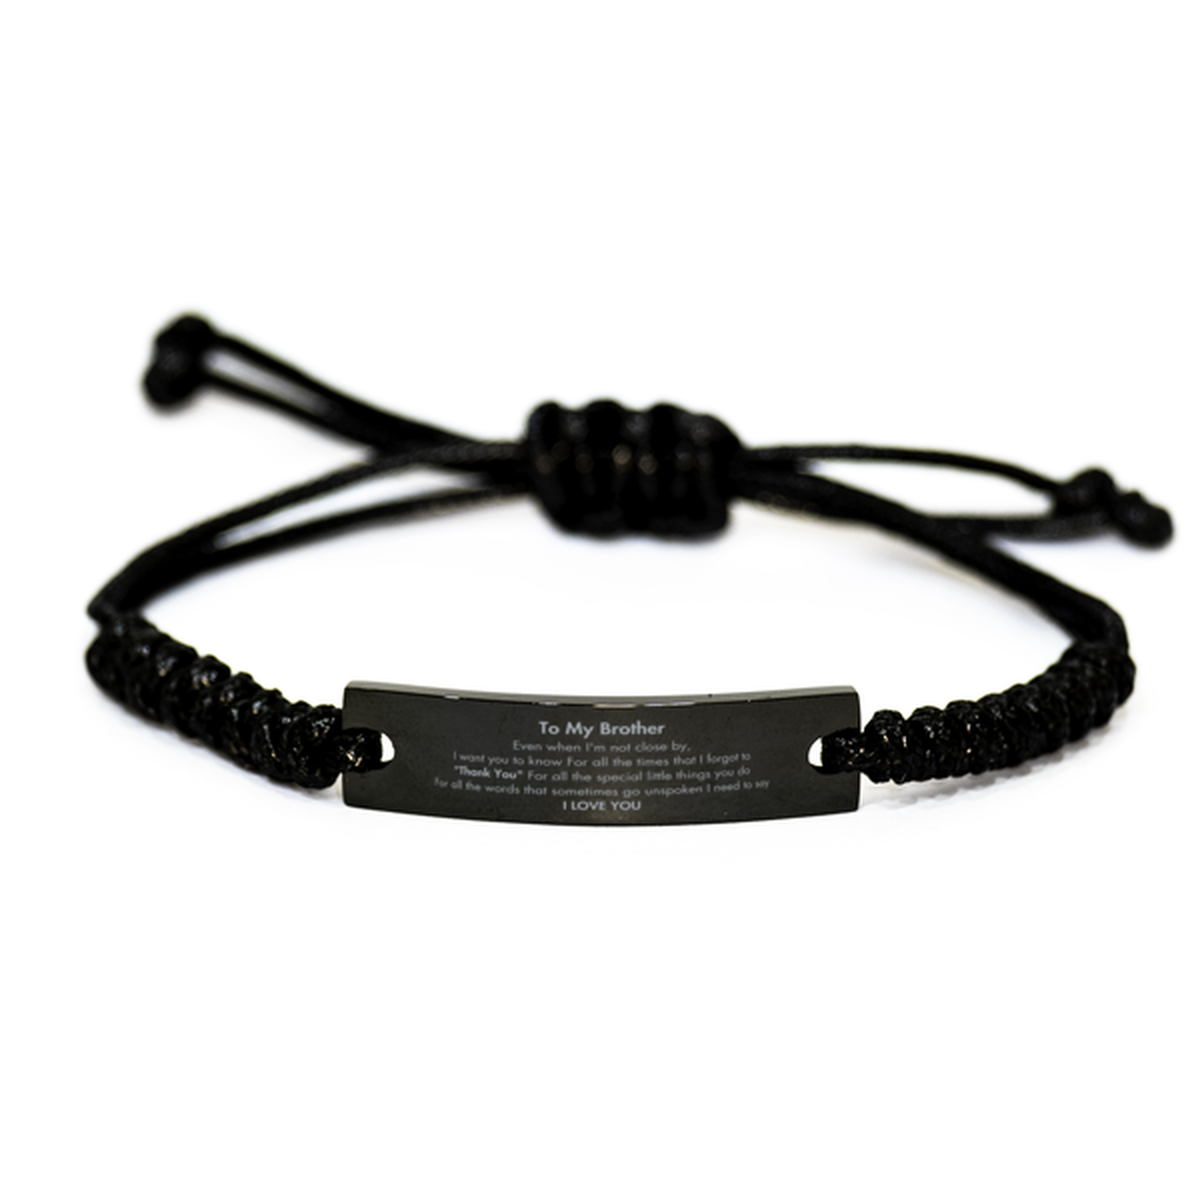 Thank You Gifts for Brother, Keepsake Black Rope Bracelet Gifts for Brother Birthday Mother's day Father's Day Brother For all the words That sometimes go unspoken I need to say I LOVE YOU